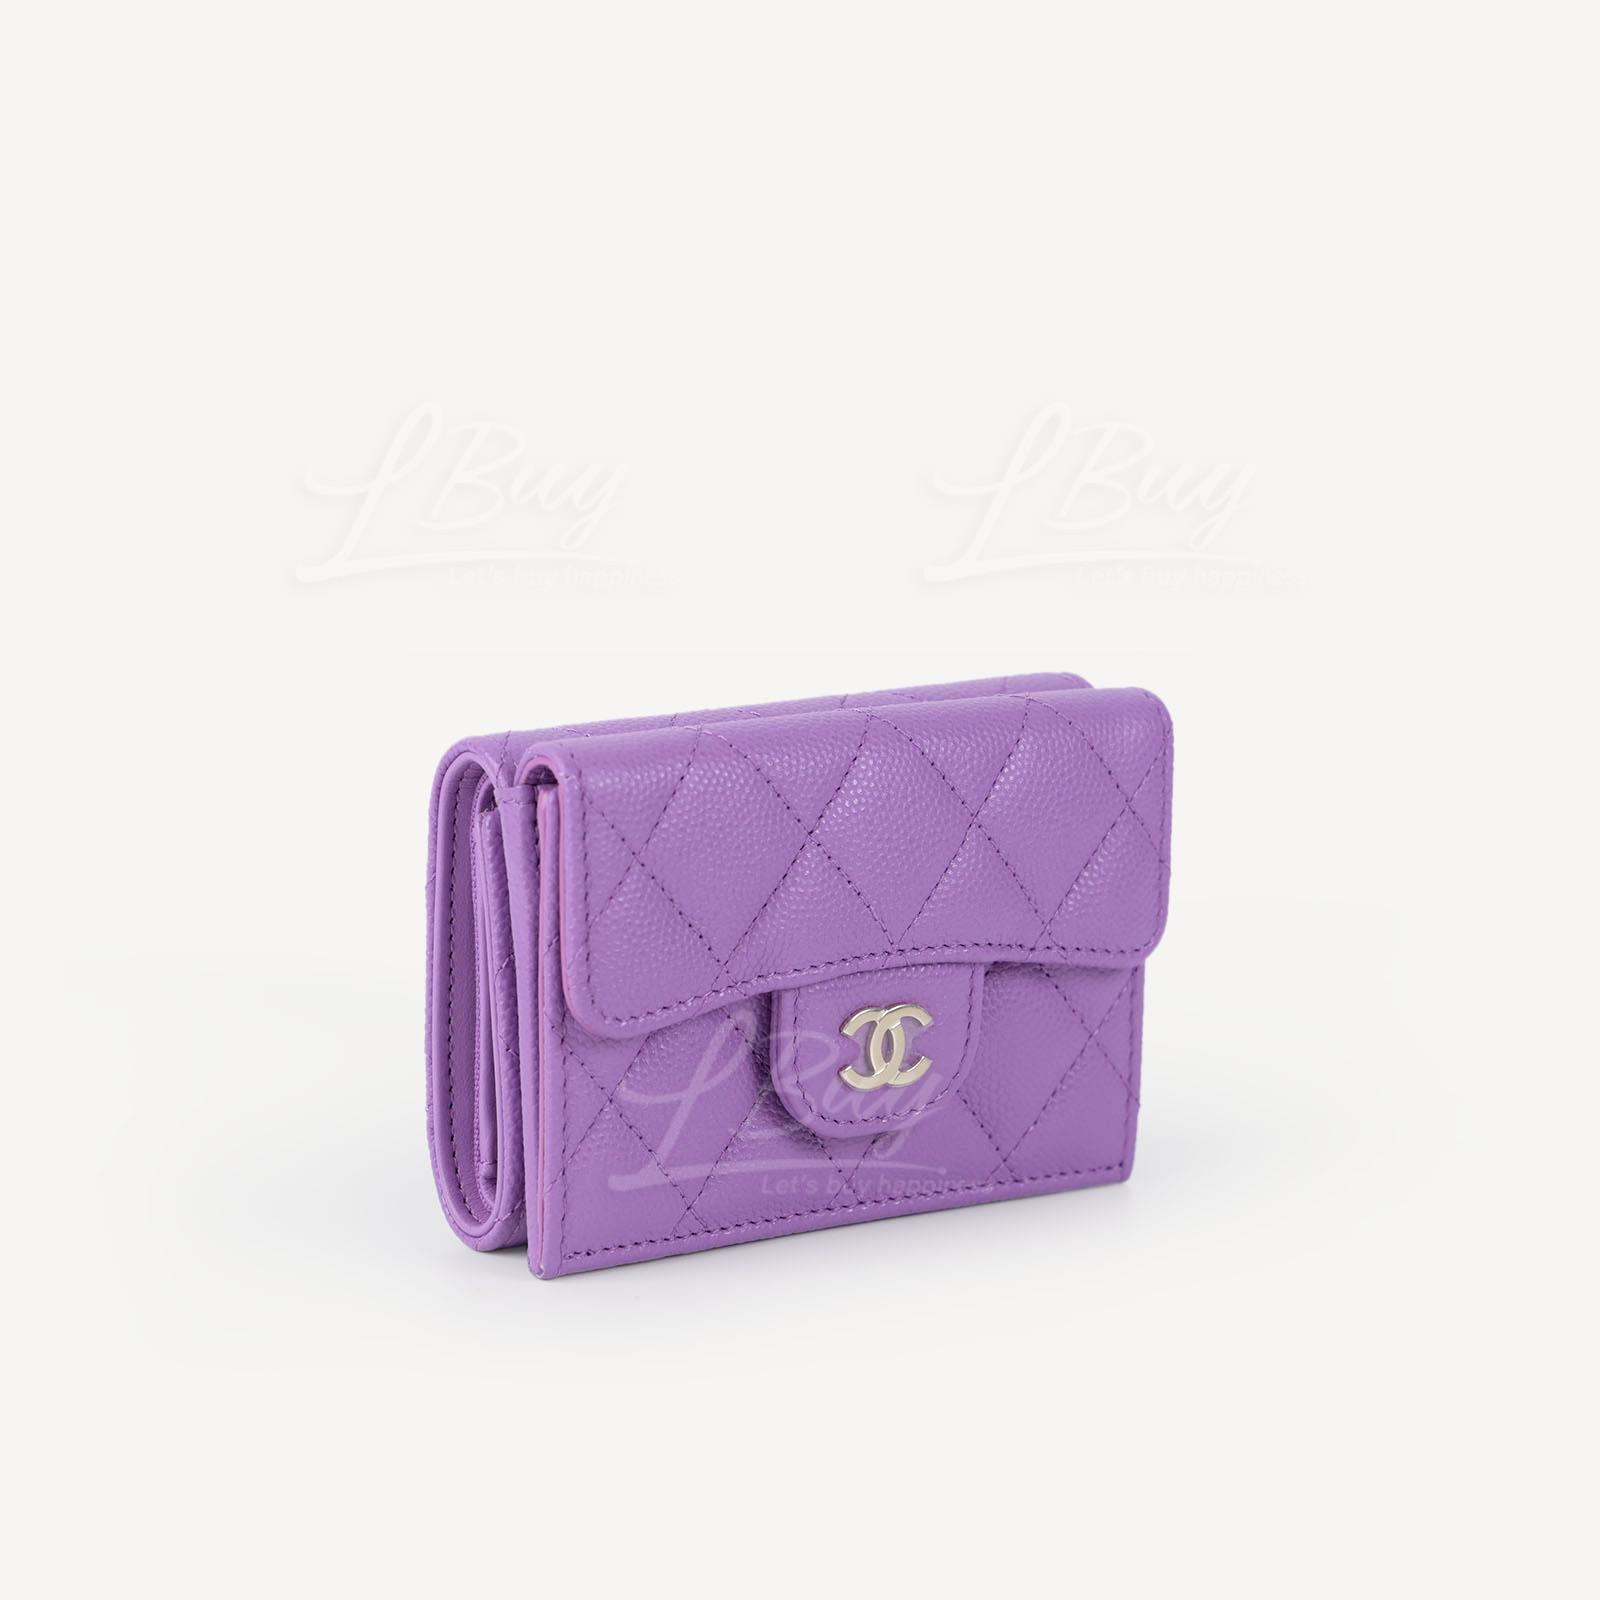 AUTHENTIC Chanel purple wallet Luxury Bags  Wallets on Carousell